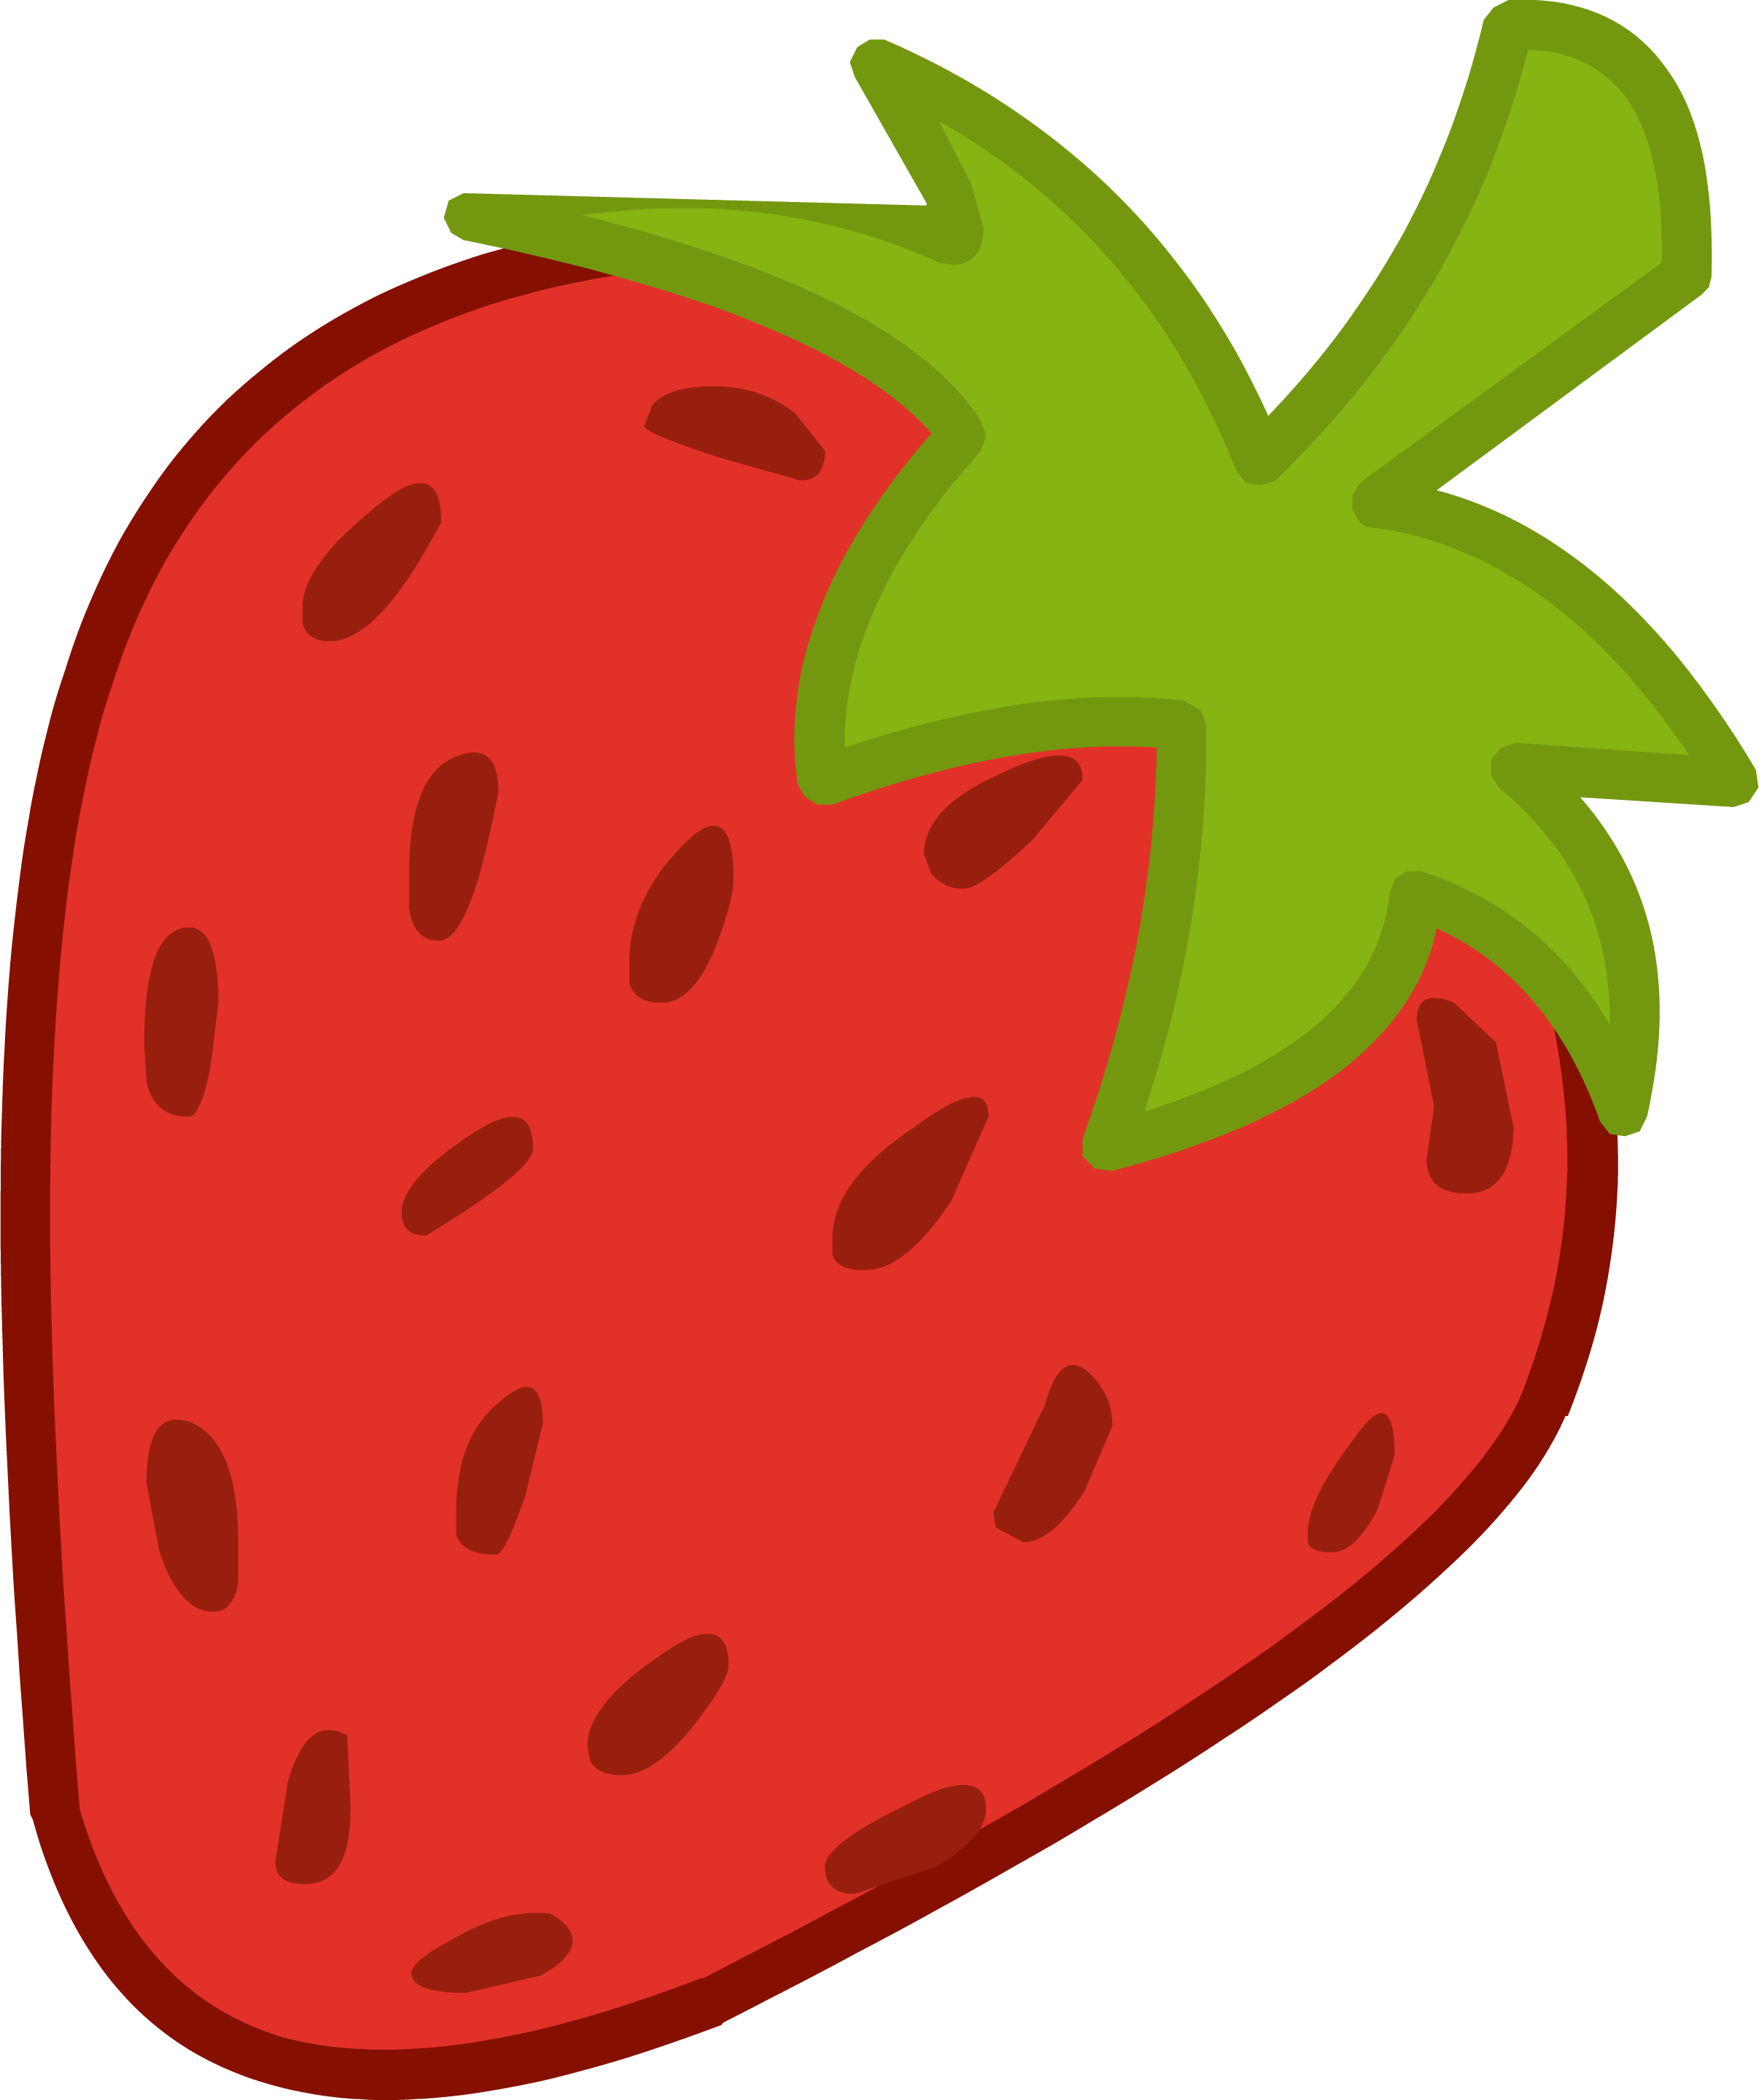 Strawberry shortcake clipart free clip art images